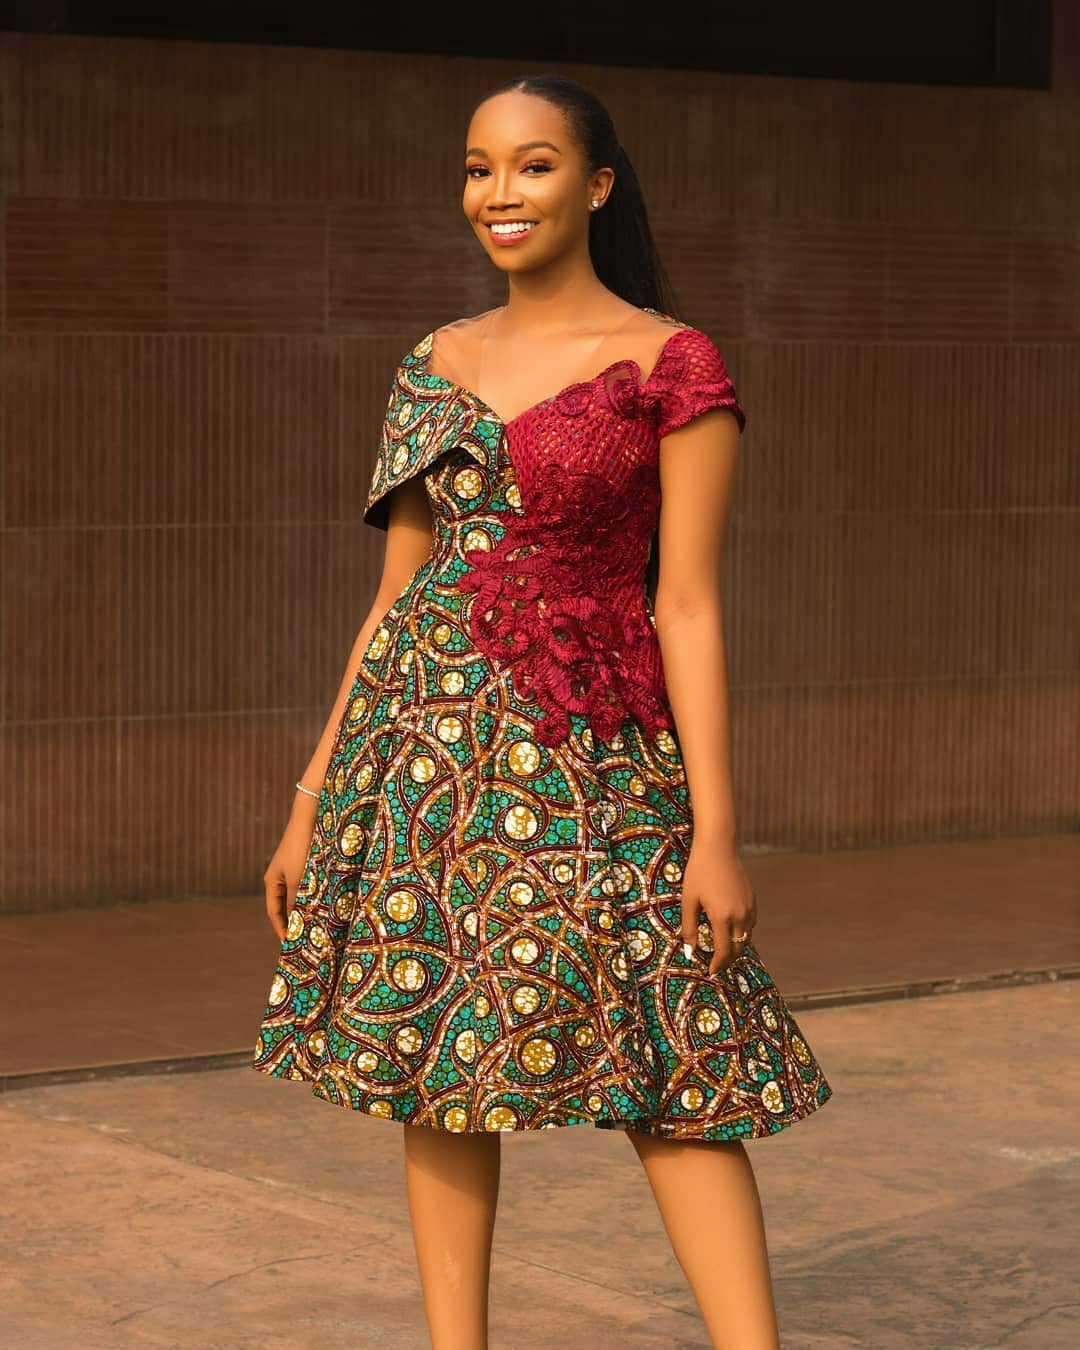 Beautiful African Dress Styles Collection In 2021 - Fashion - Nigeria